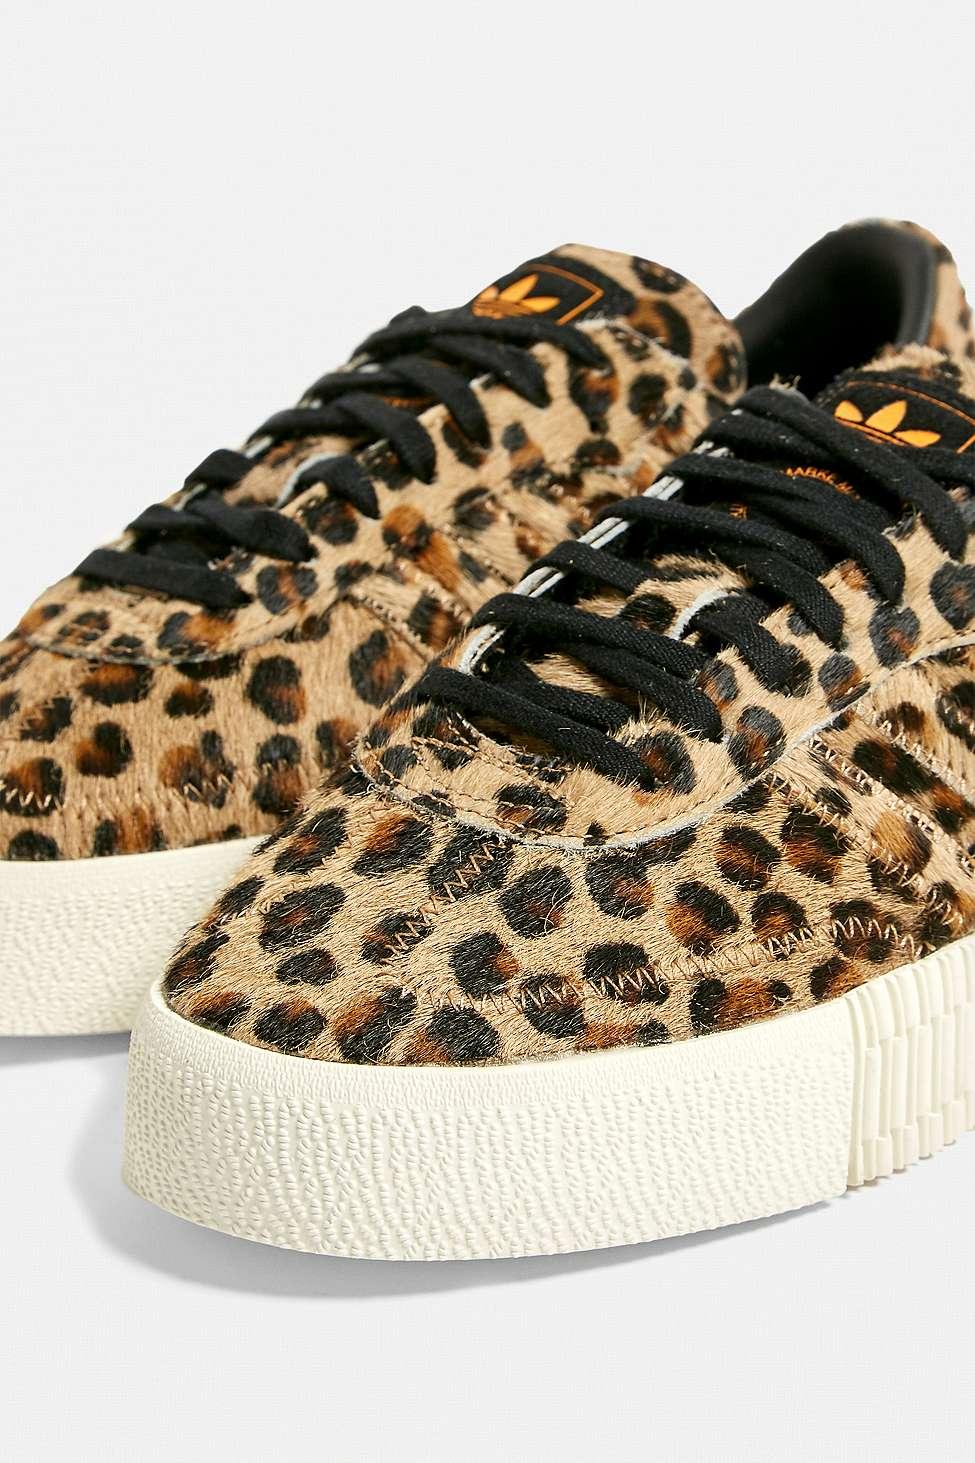 adidas Originals Leather Samba Rose Leopard Print Trainers in Brown - Lyst